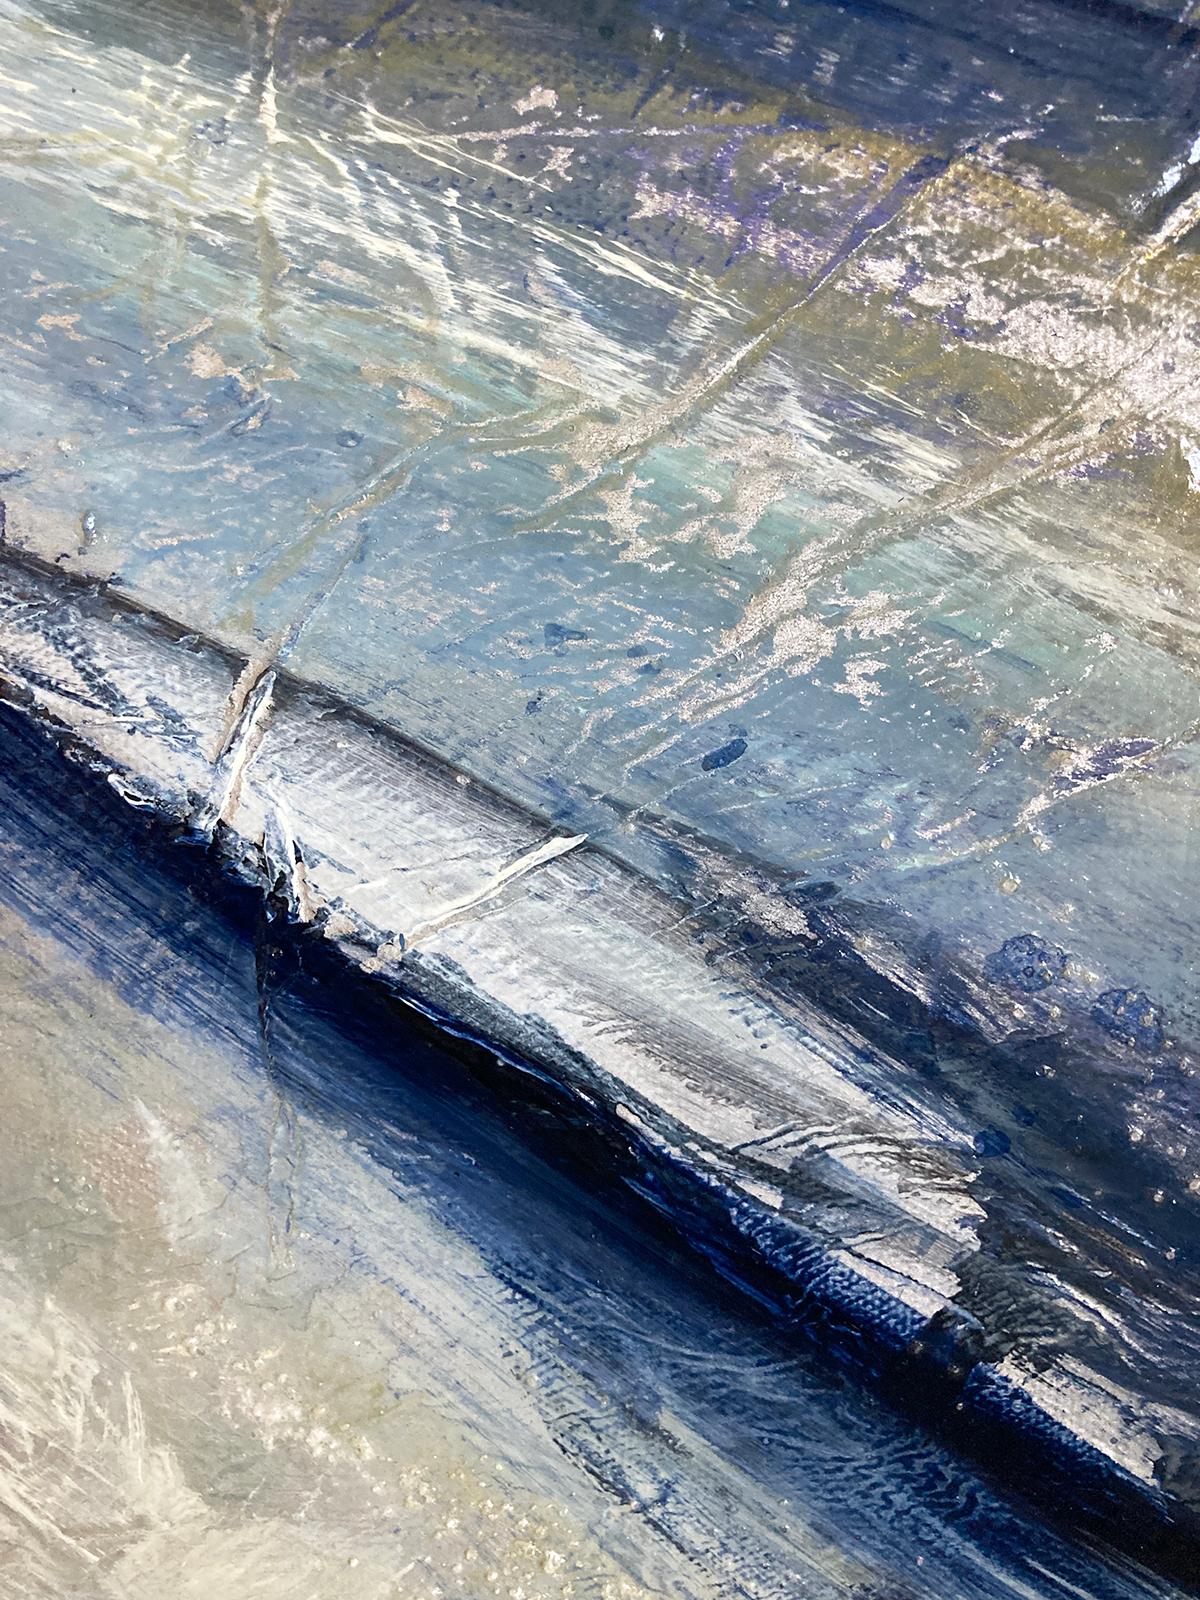 Time Waits for No One, Original Contemporary Blue Abstract Landscape Painting
36x24 (HxW), Mixed Media

The surface of this abstracted landscape is textured from scumbling and thick impasto application of paint, breathing life into the scene that